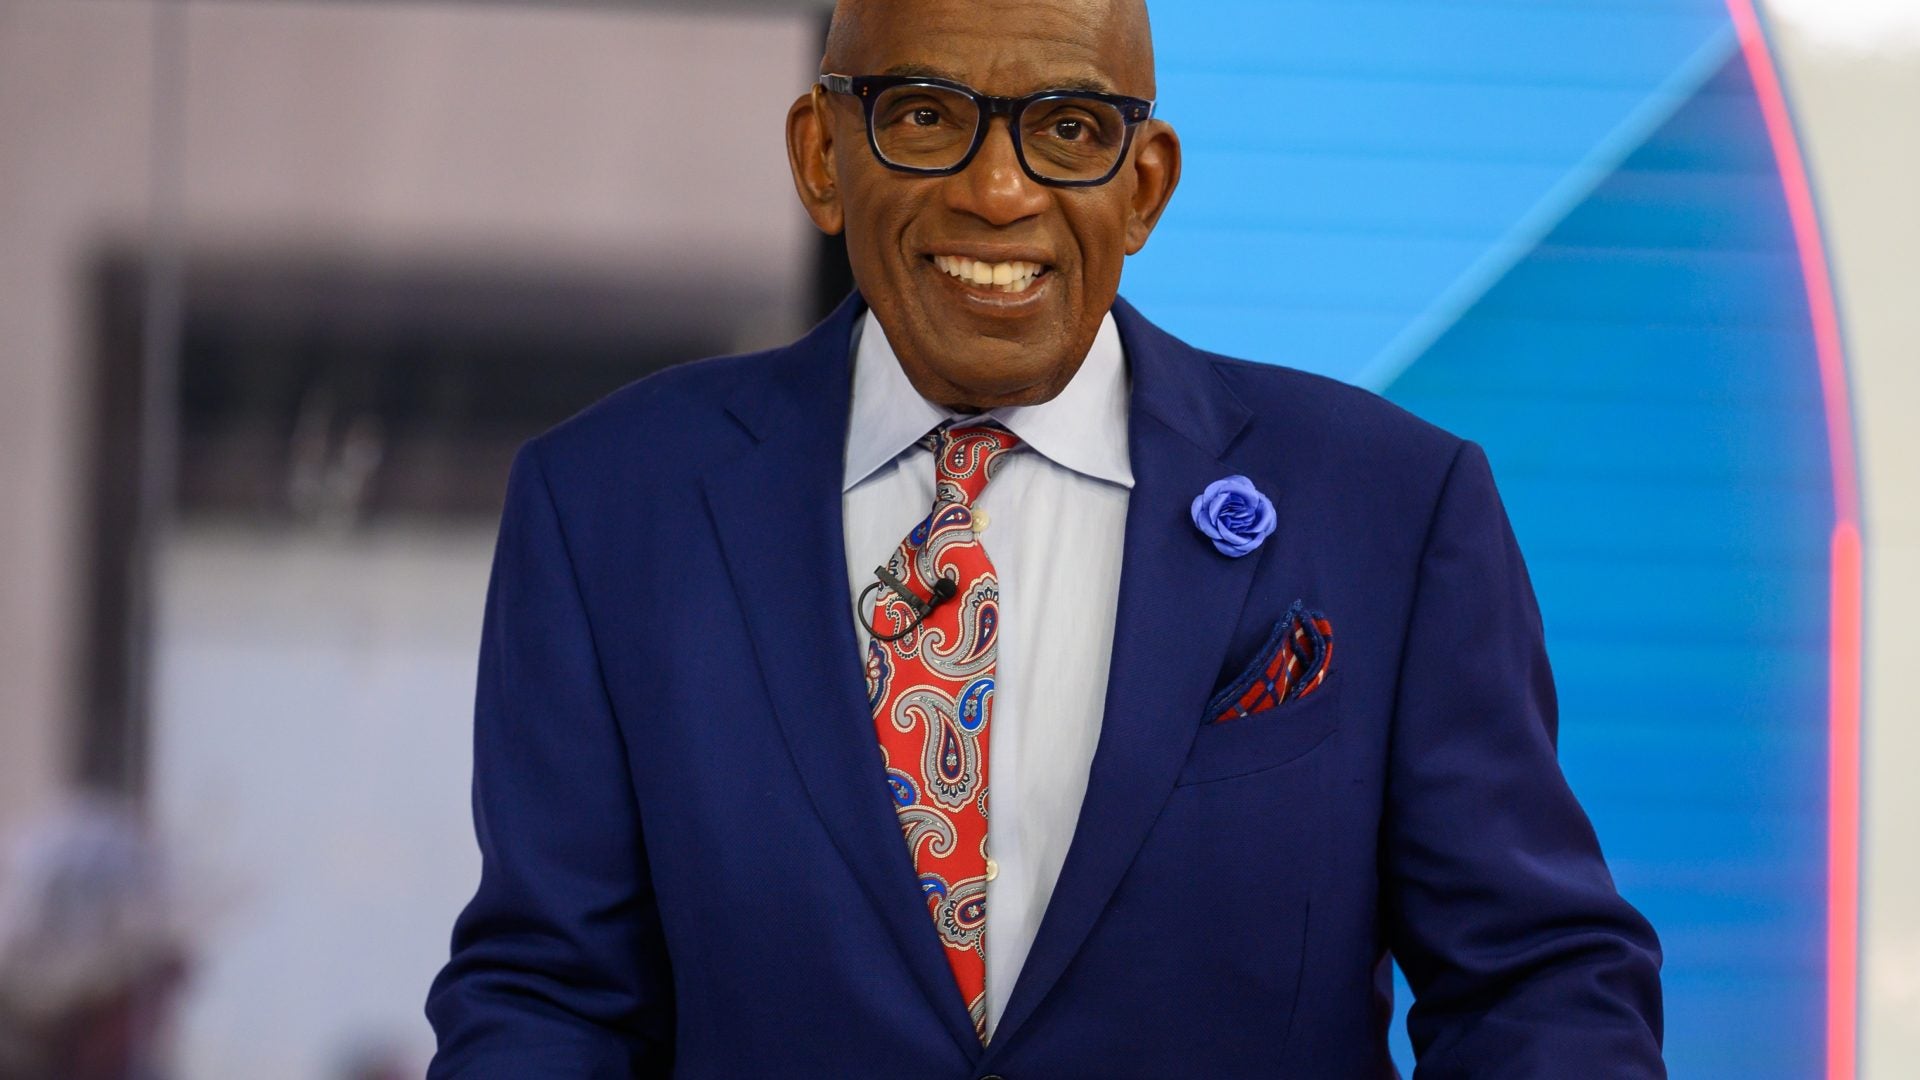 Al Roker Gives a Health Update On The Today Show